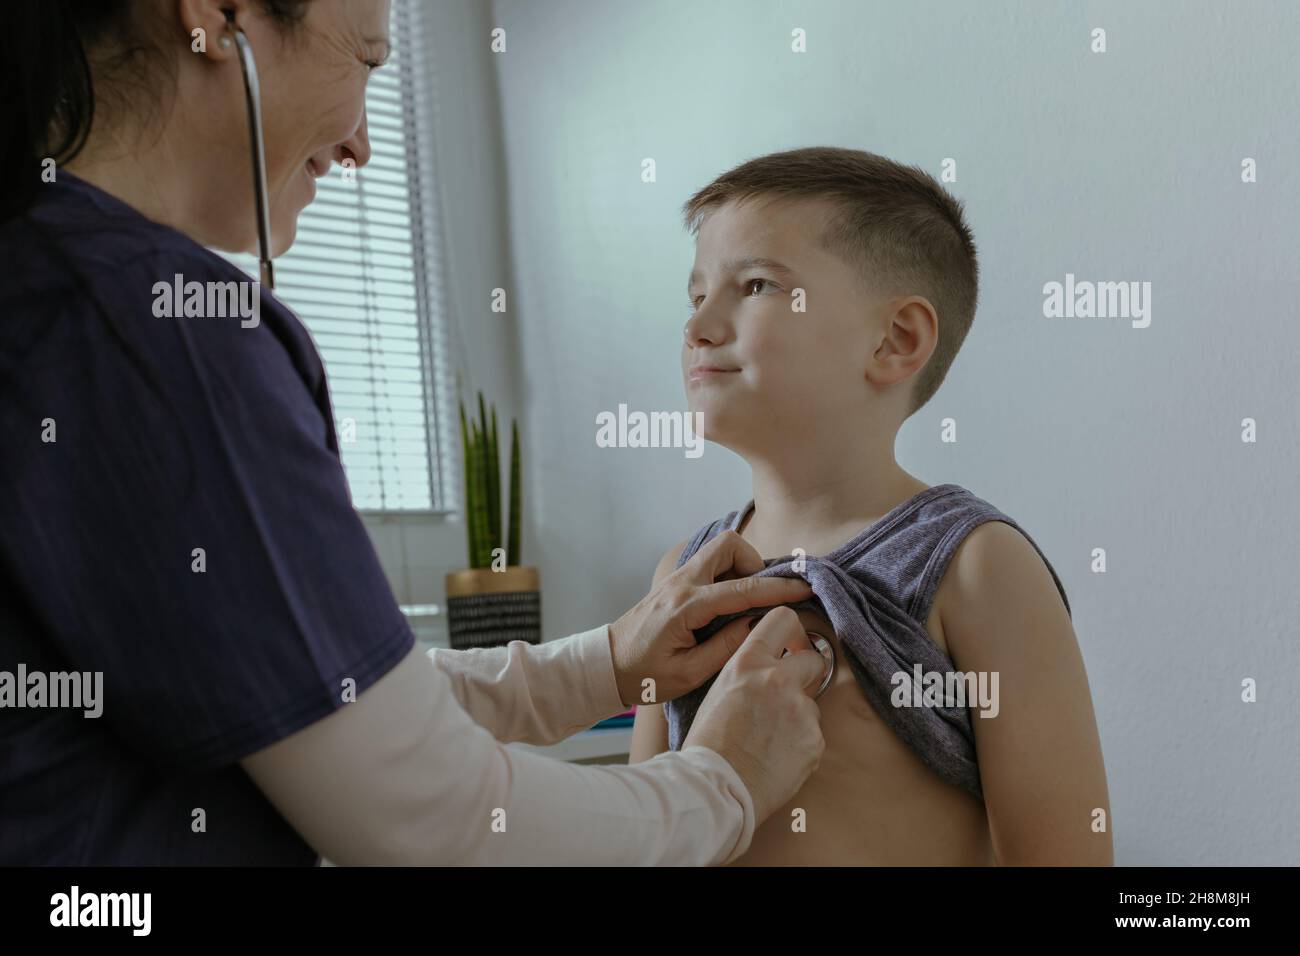 Child Having Pediatric Checkup at Doctor Office. Female Doctor Examining 7 Year Old Boy with Stethoscope at Medical Clinic. Stock Photo